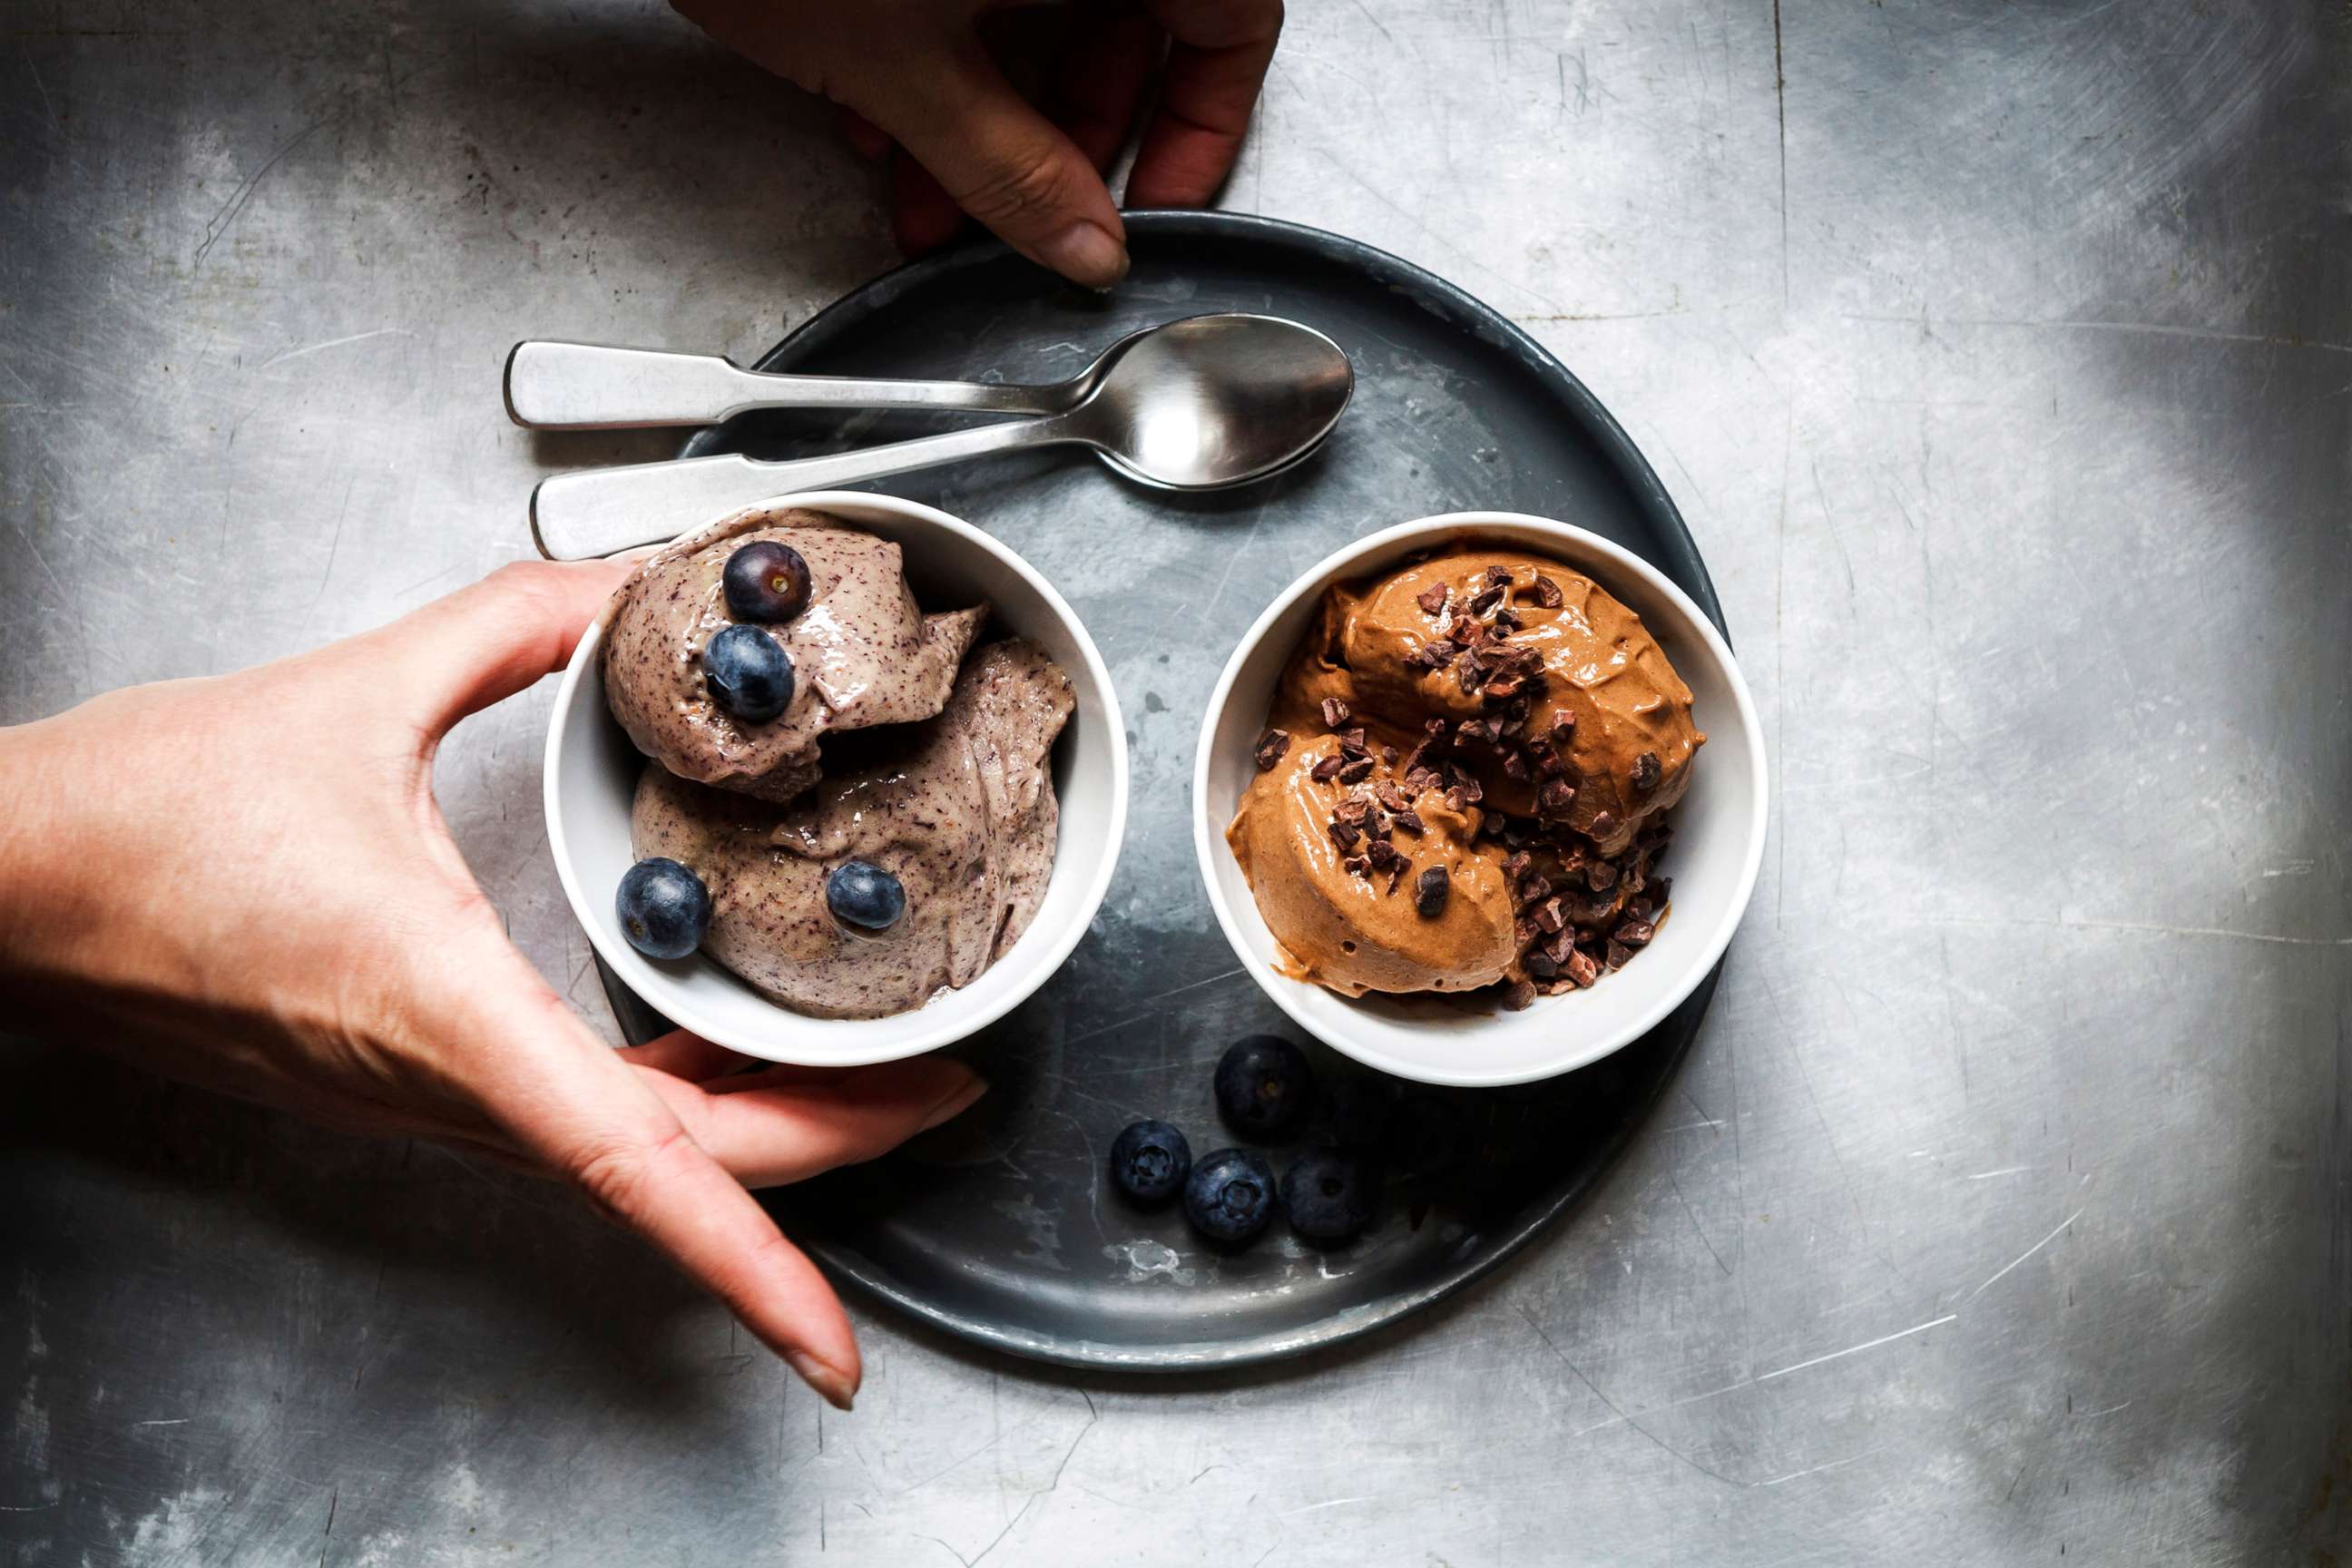 PHOTO: Bowls of vegan blueberry banana and chocolate banana ice cream are pictured in a stock photo.